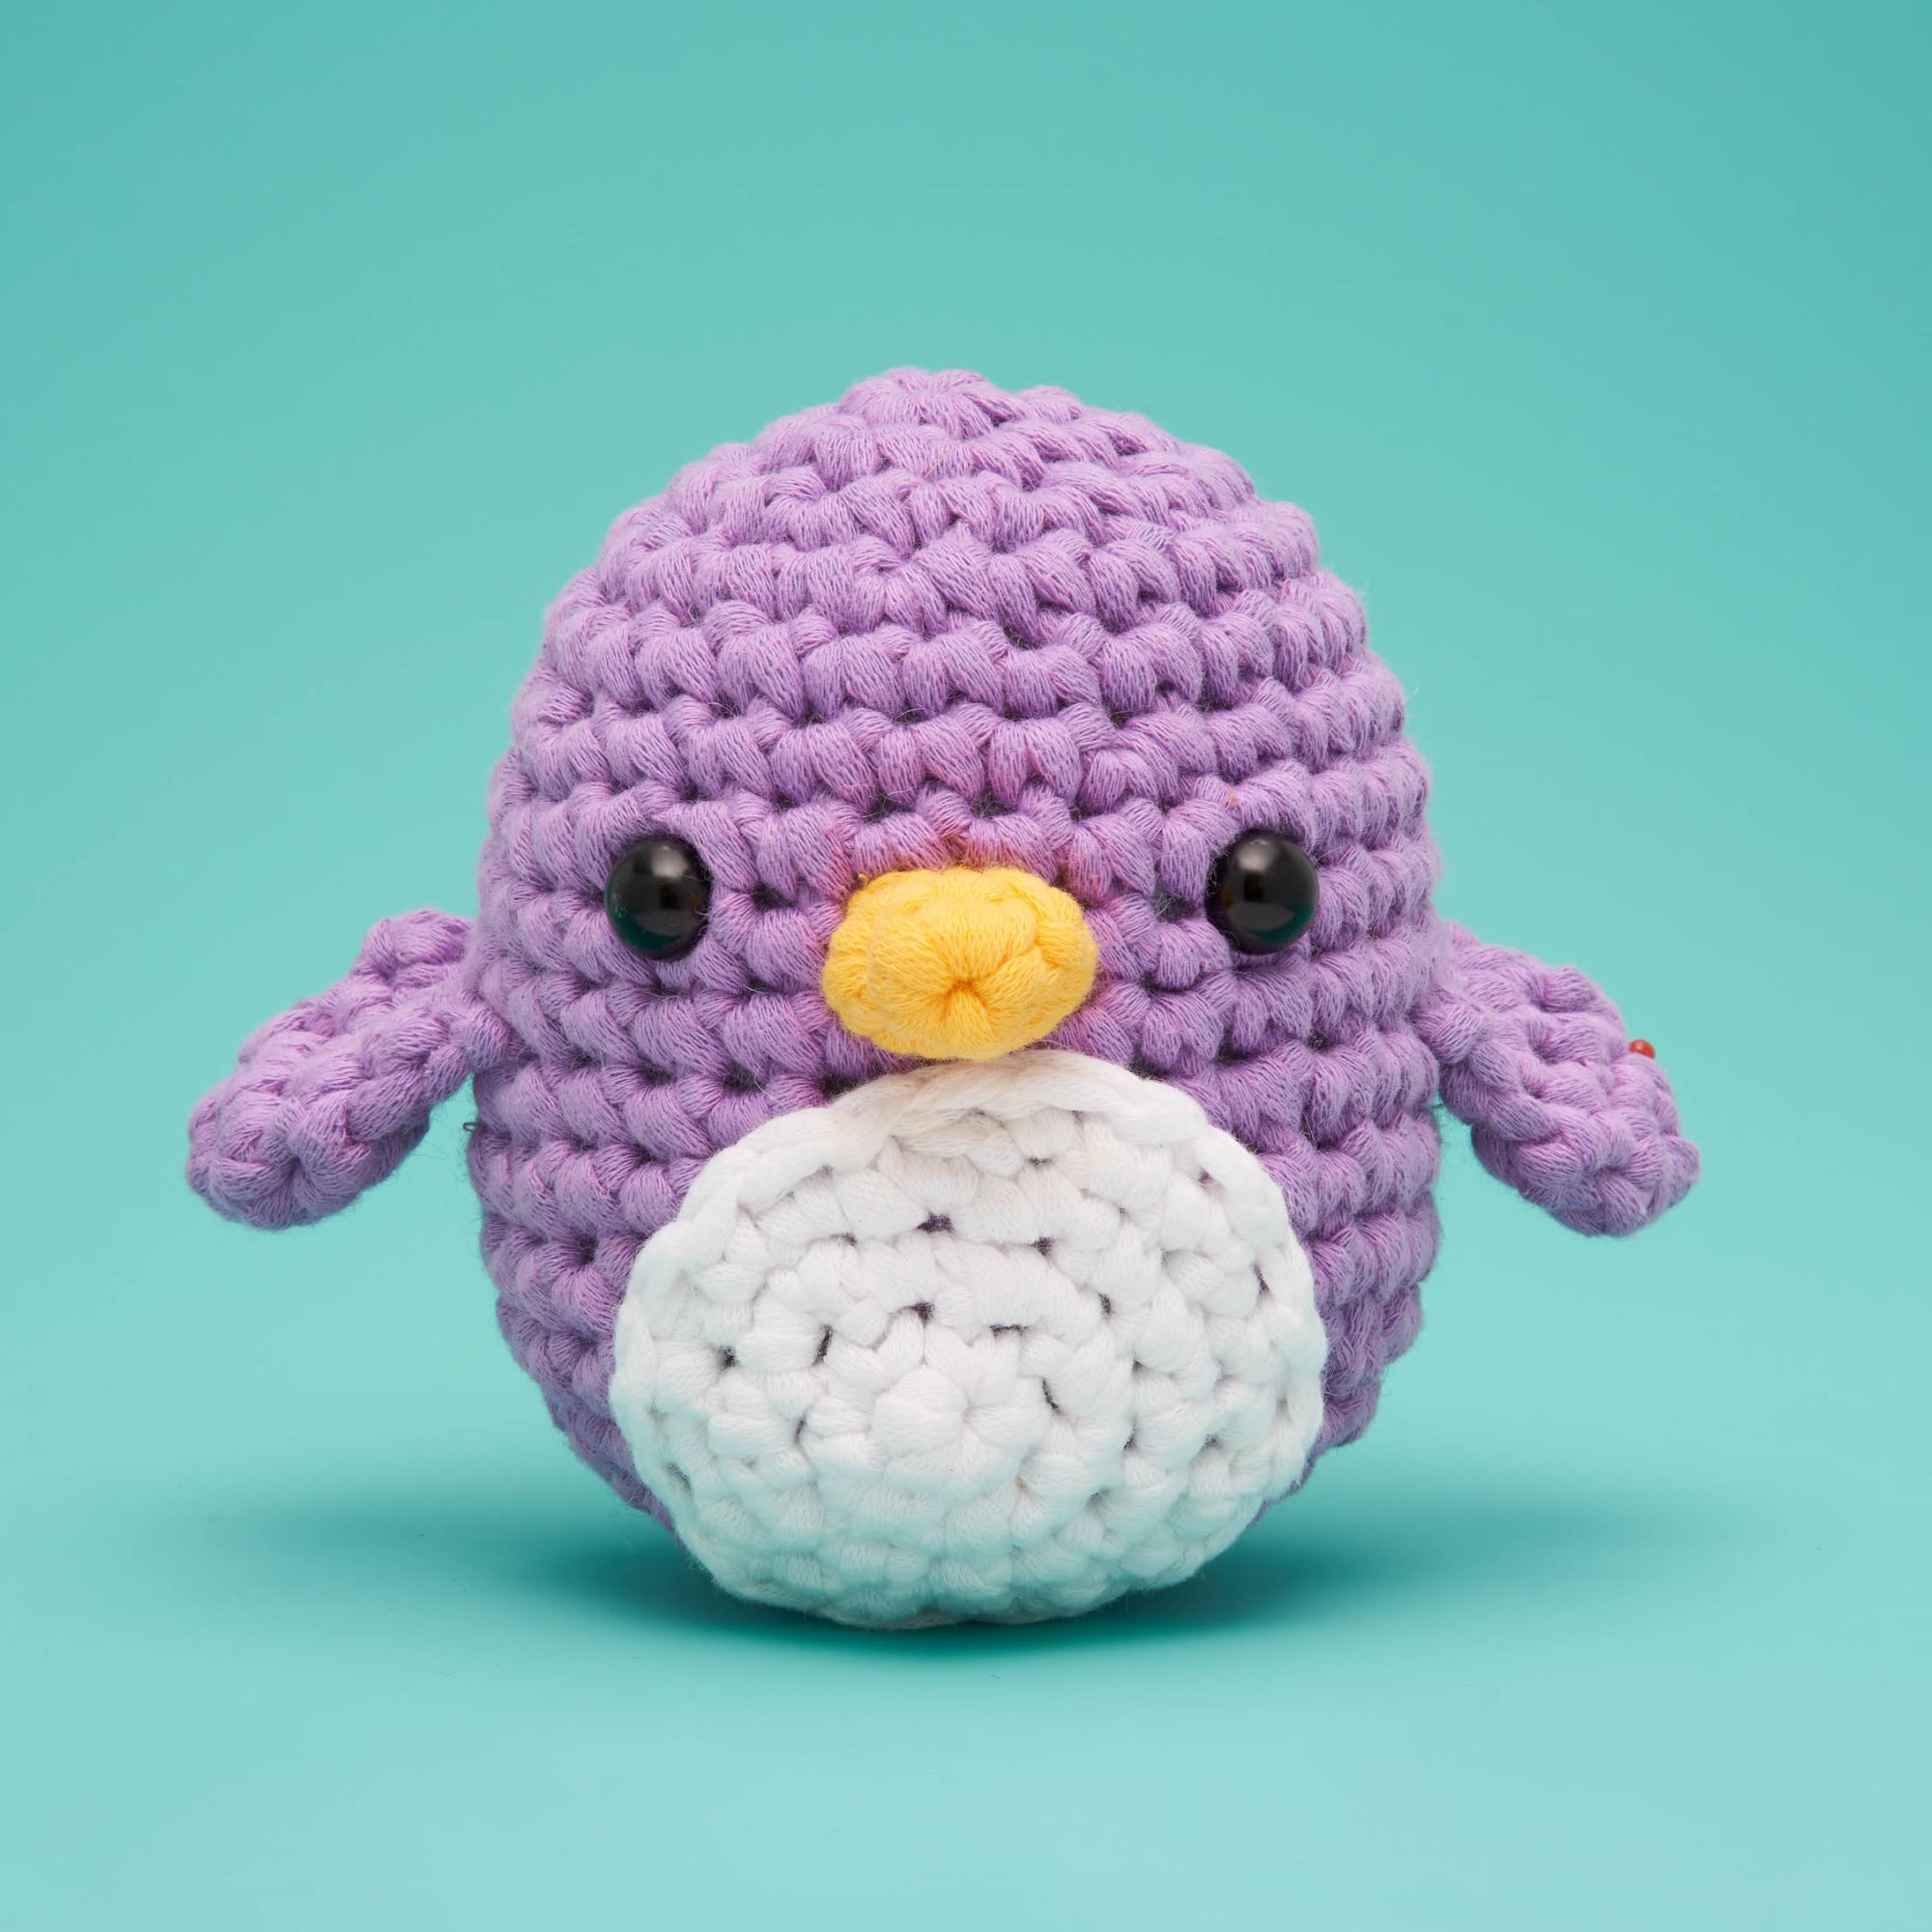 Limited Edition Penguin Crochet Kit | The Woobles